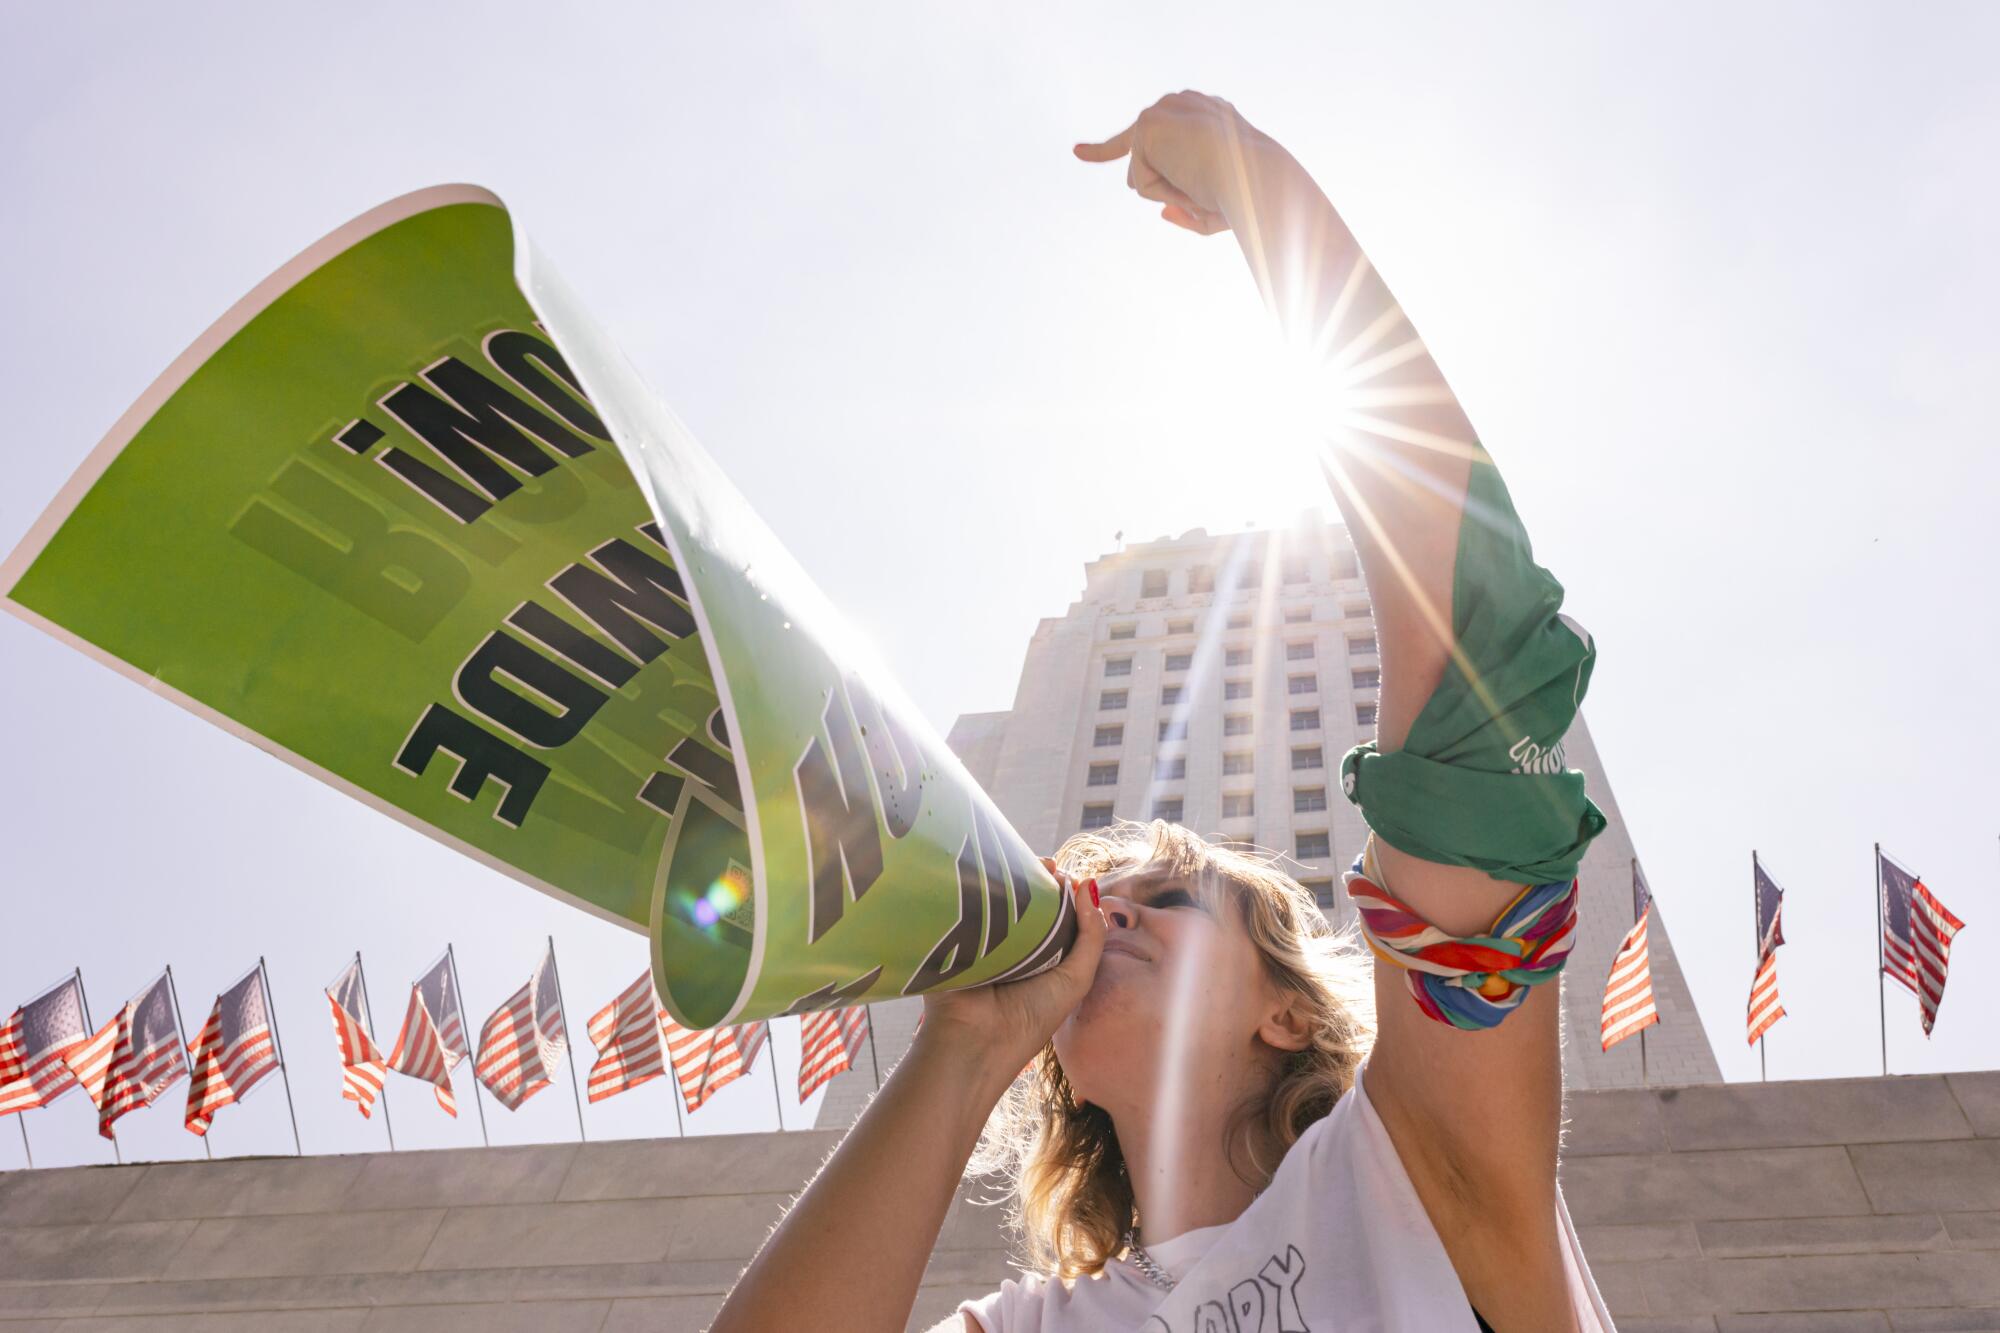 A protester raising her arm and using a poster as a megaphone outside a tall building with a long row of American flags